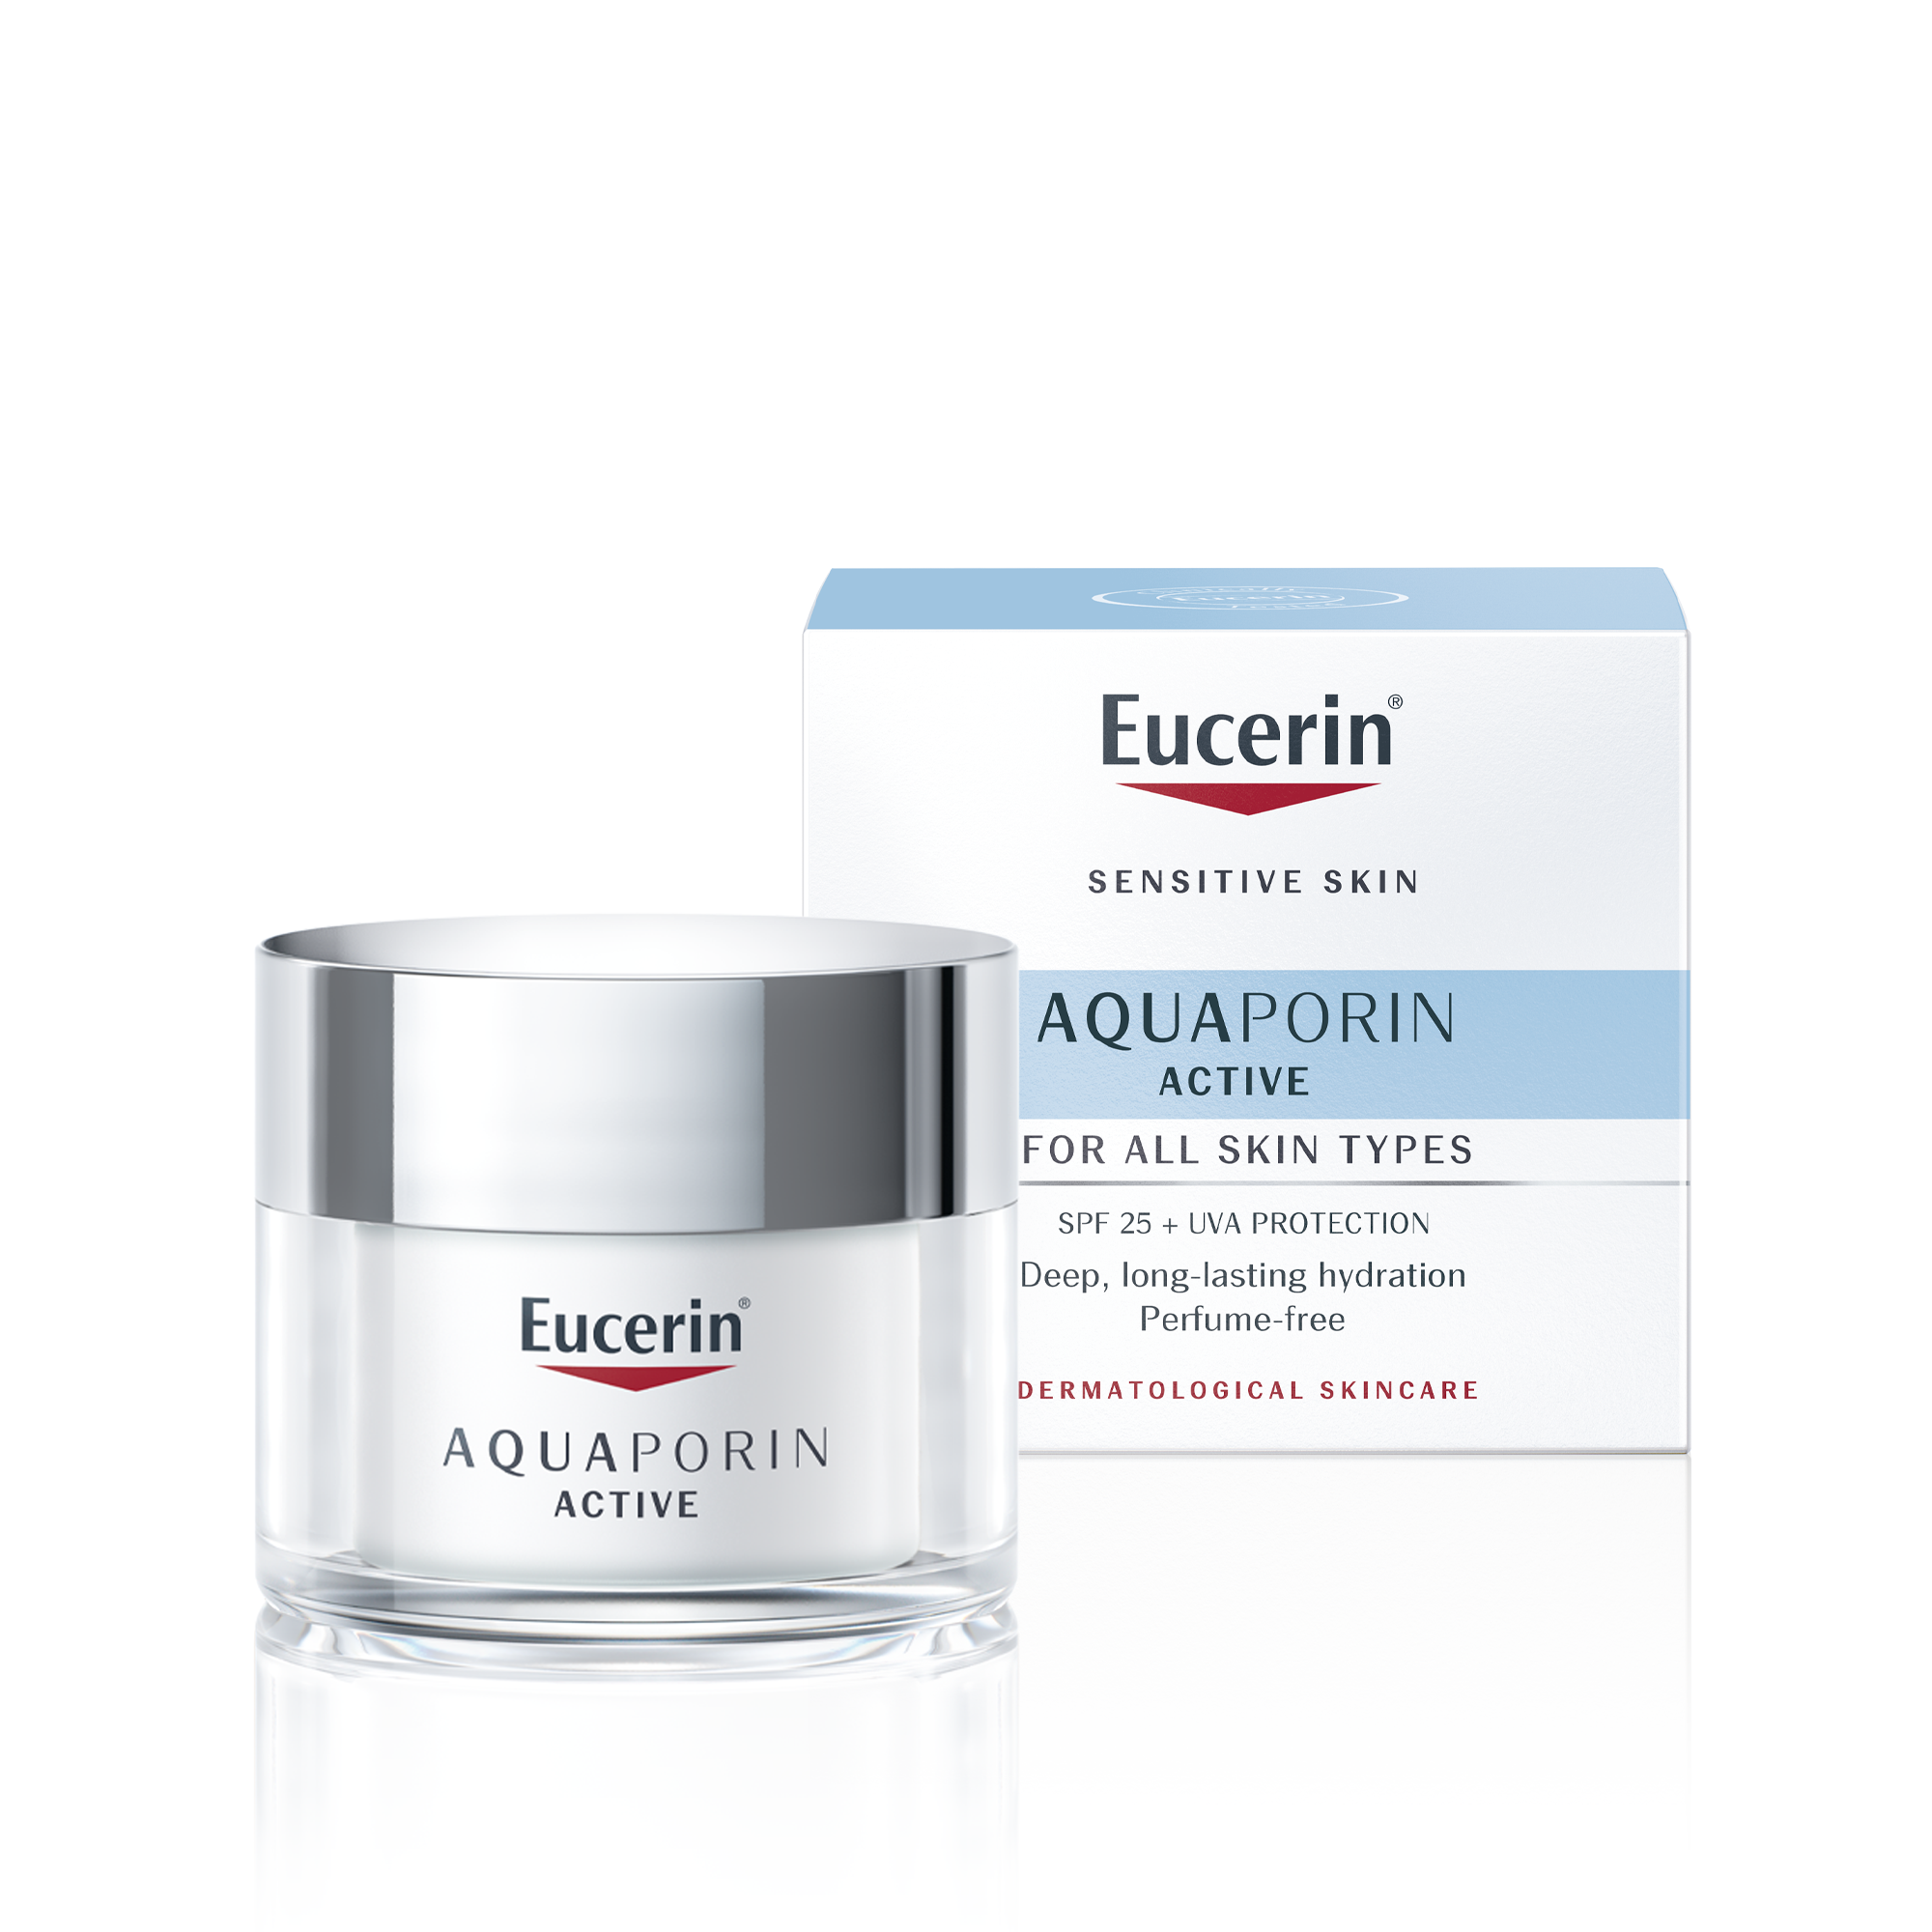 Aquaporin Active All Skin Types SPF 25